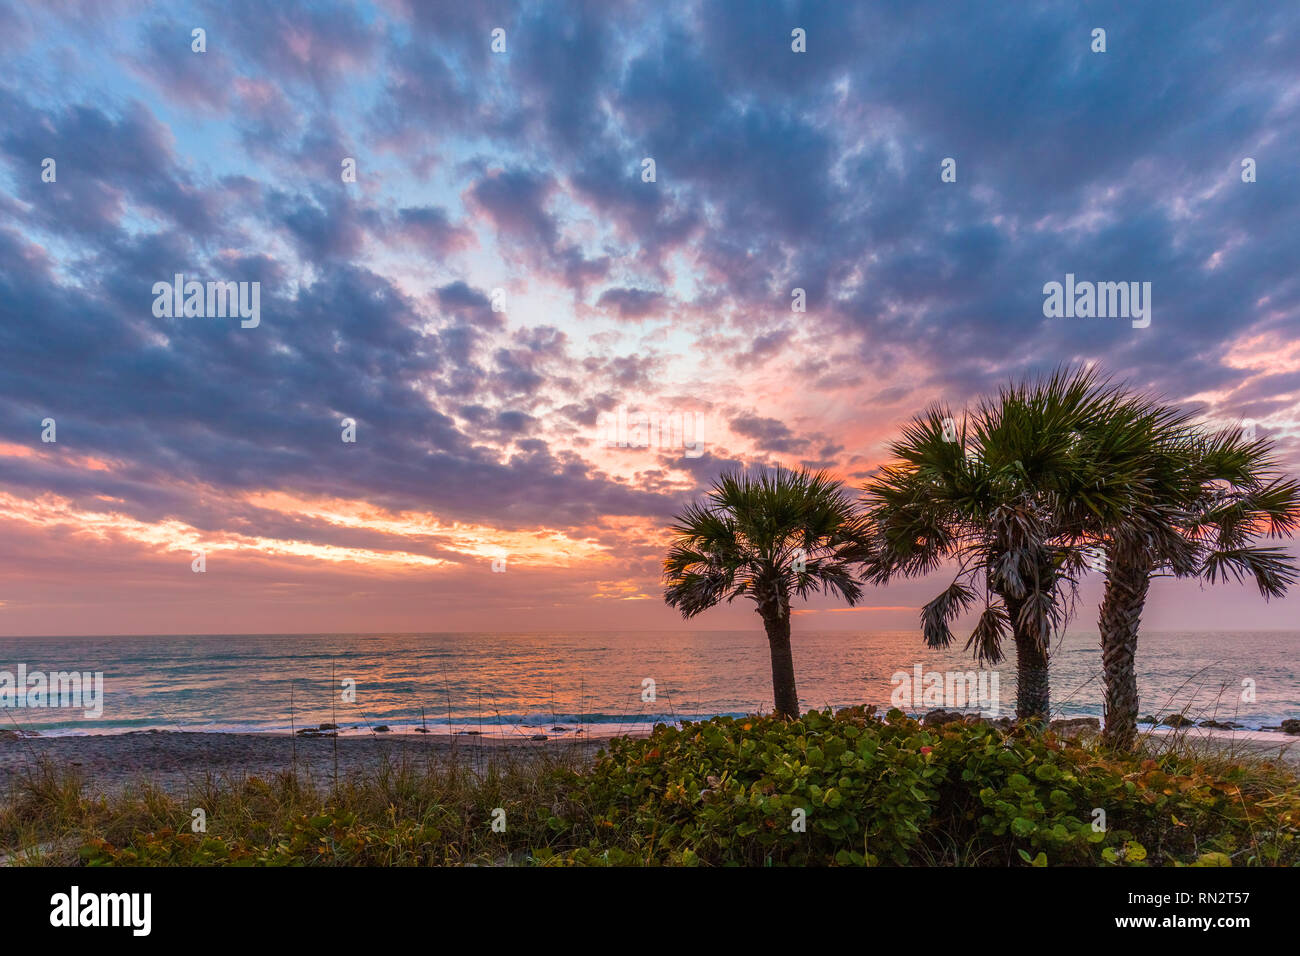 Sunset over Gulf of Mexico at Caspersen Beach in Venice Florida in the United States Stock Photo